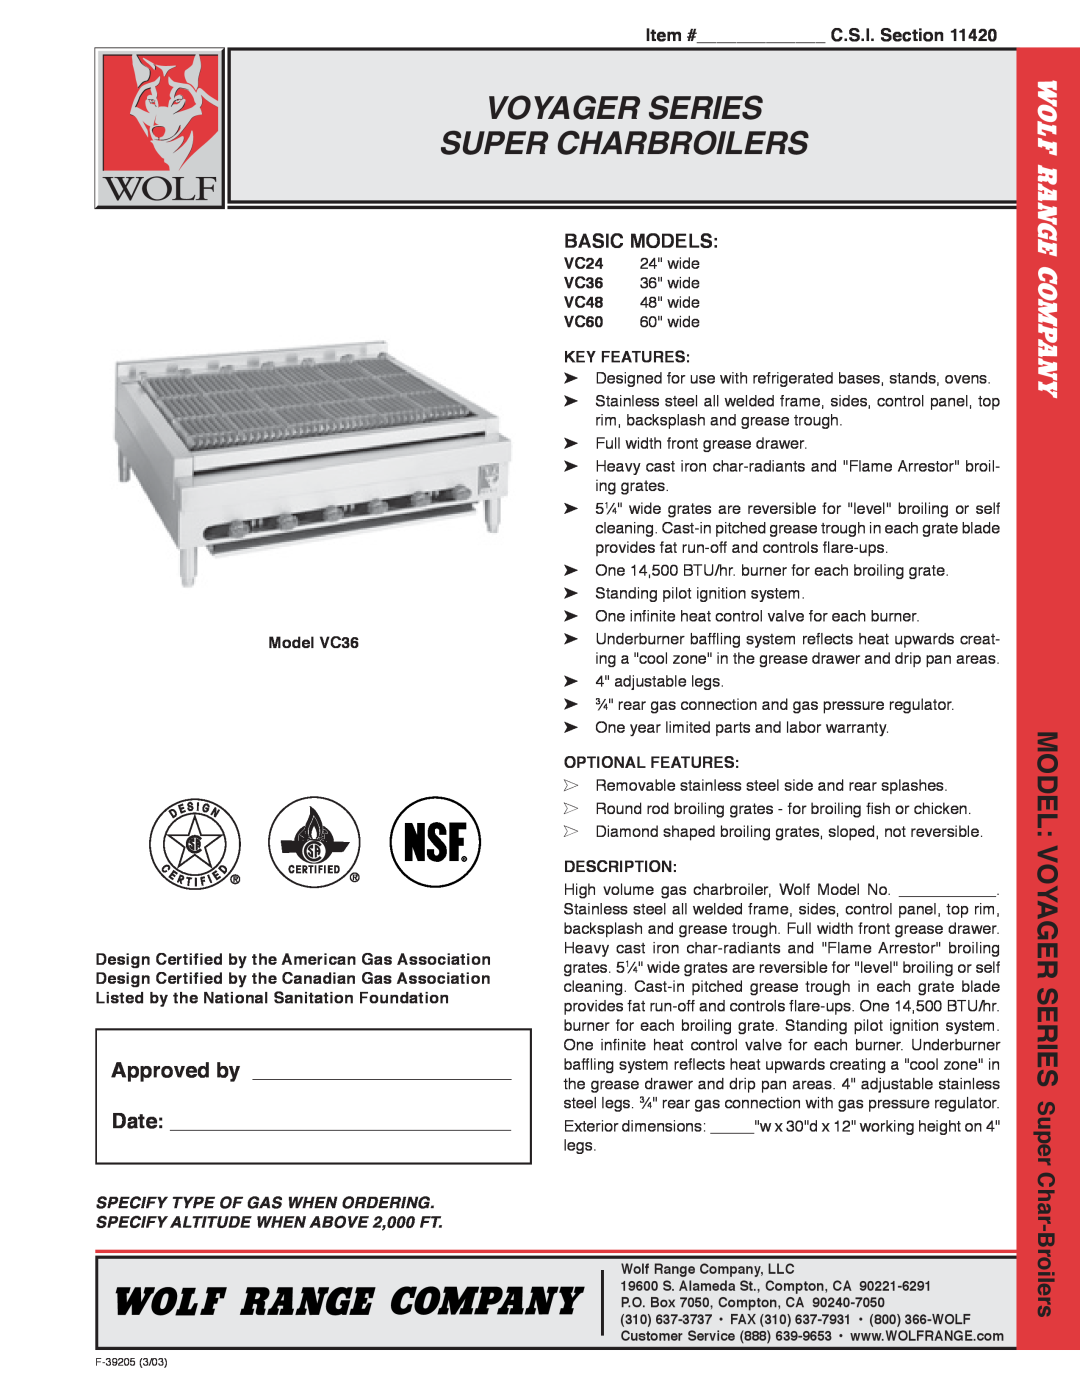 Wolf VC36 warranty Voyager Series Super Charbroilers, Char-Broilers, Approved by Date, Basic Models, Item # C.S.I. Section 